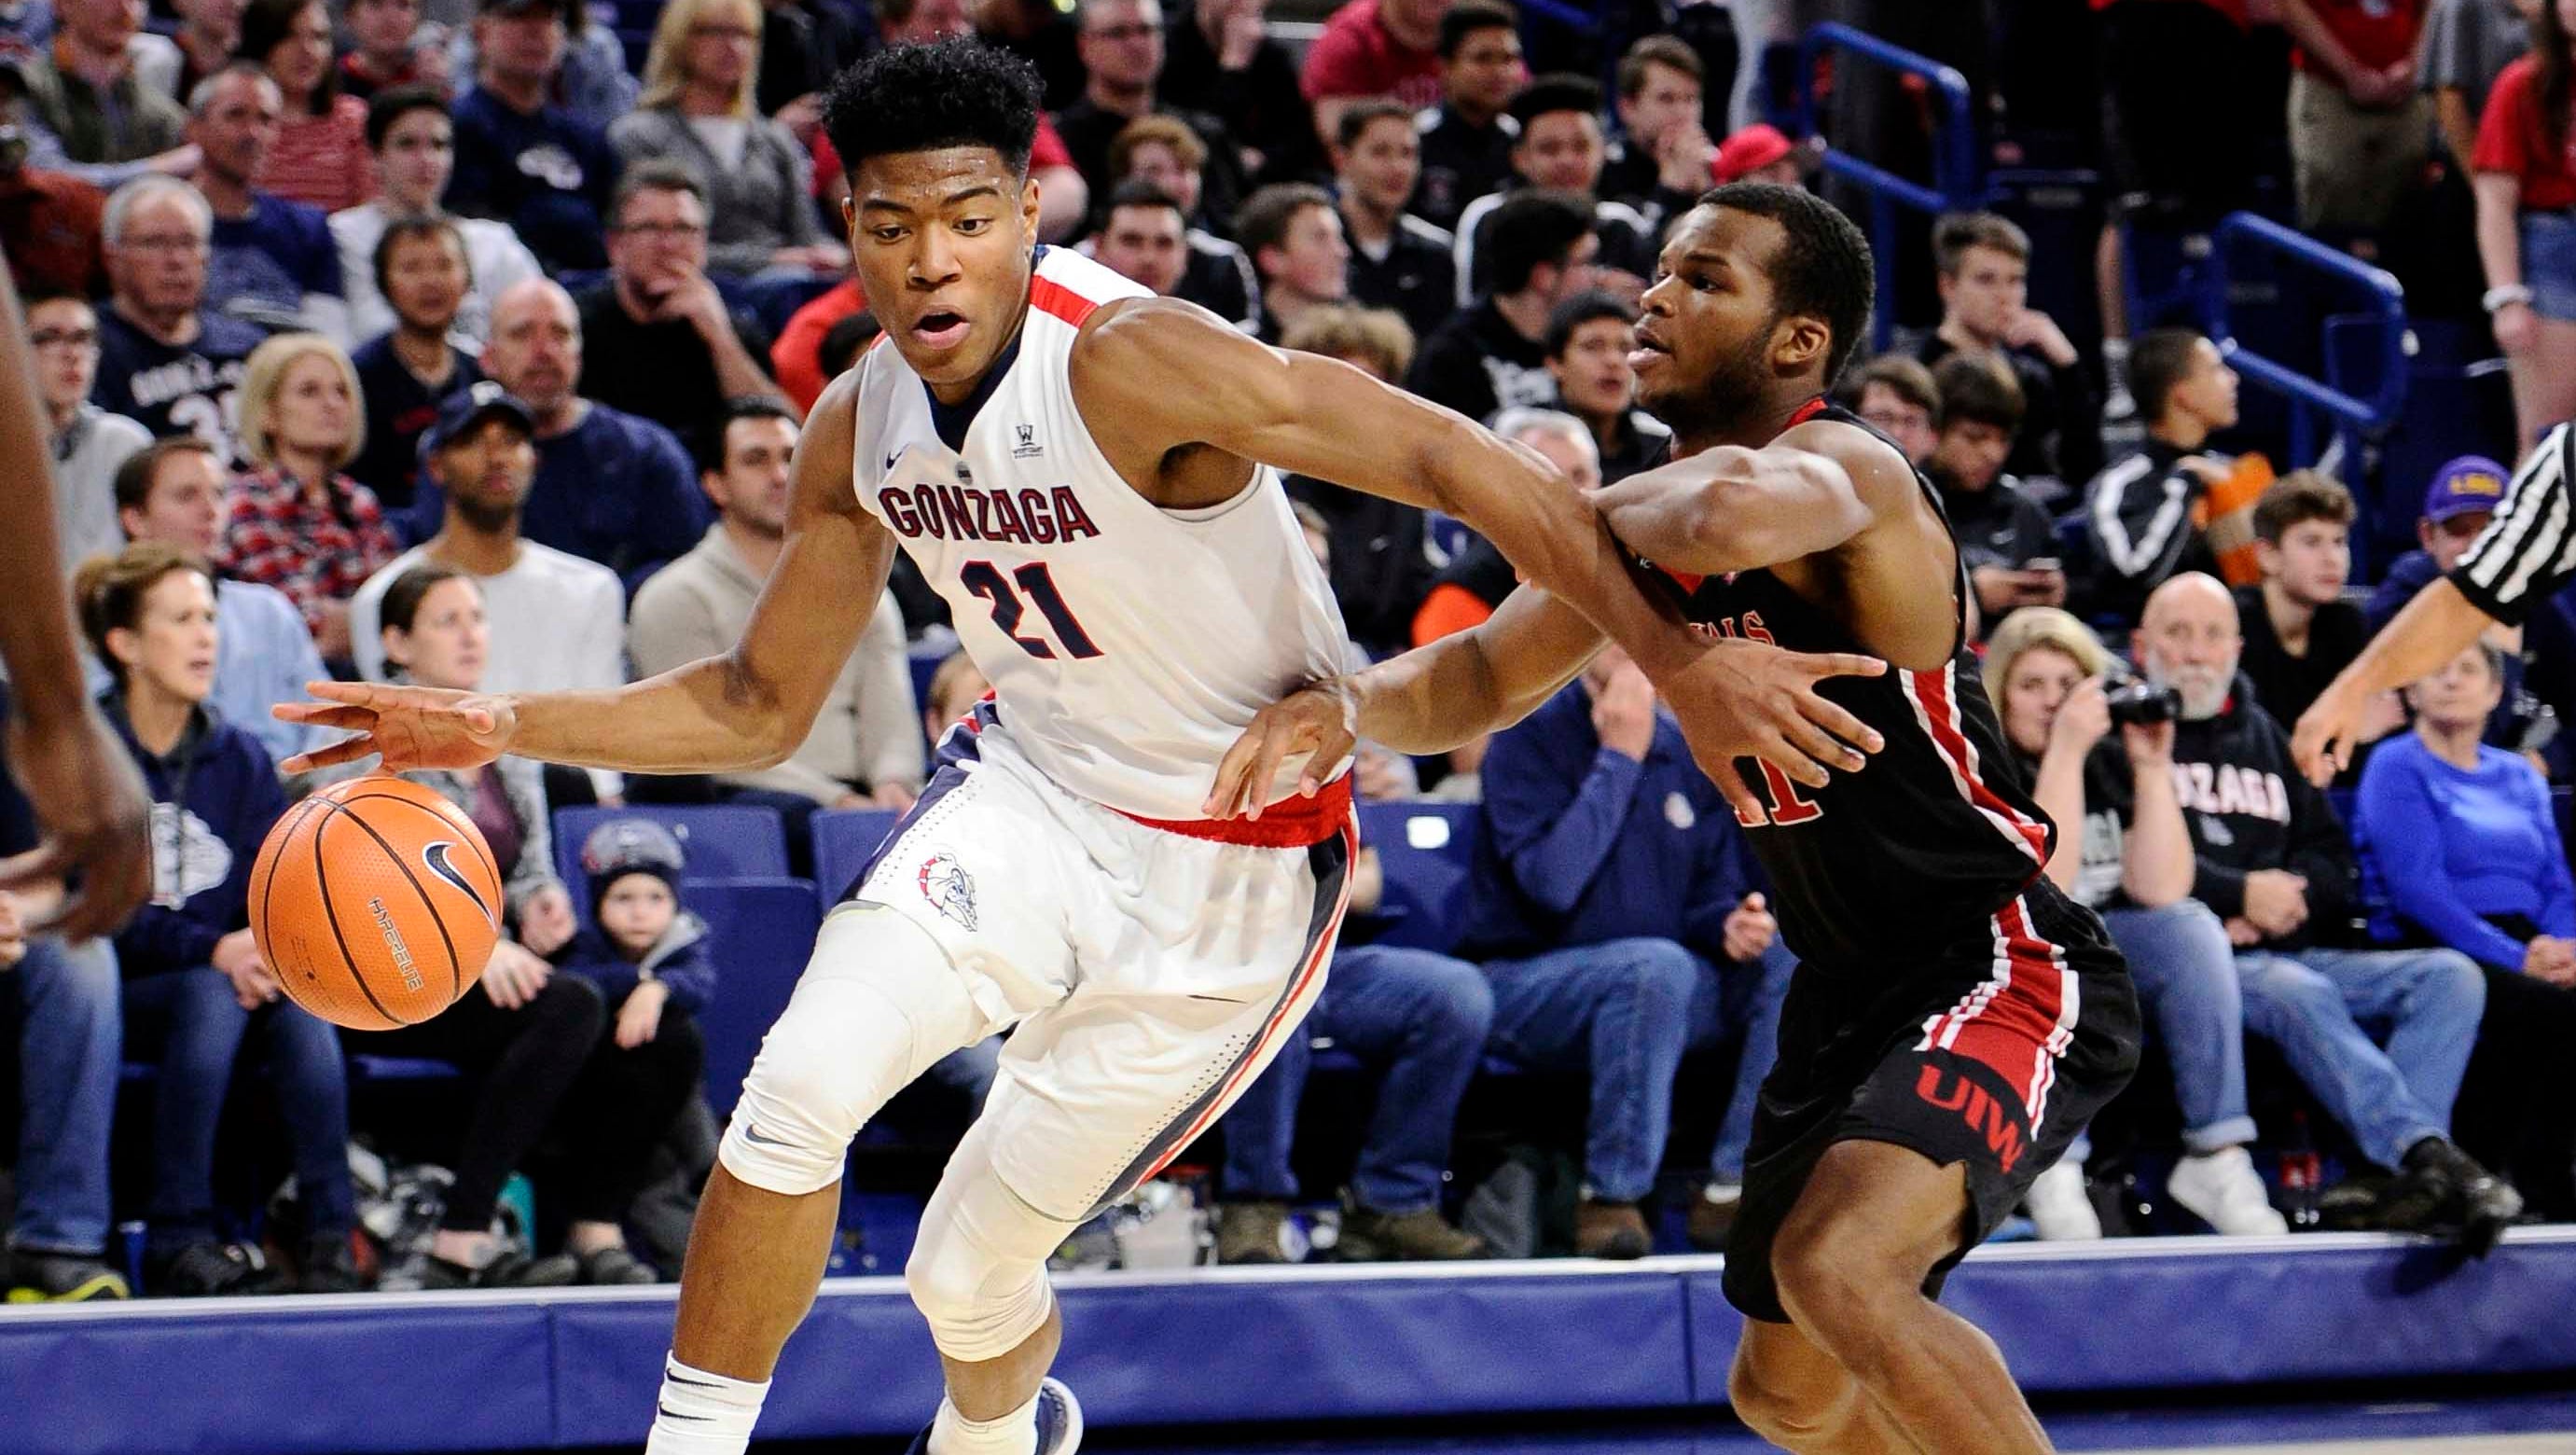 Gonzaga Again Thriving In College Basketball With International Flavor